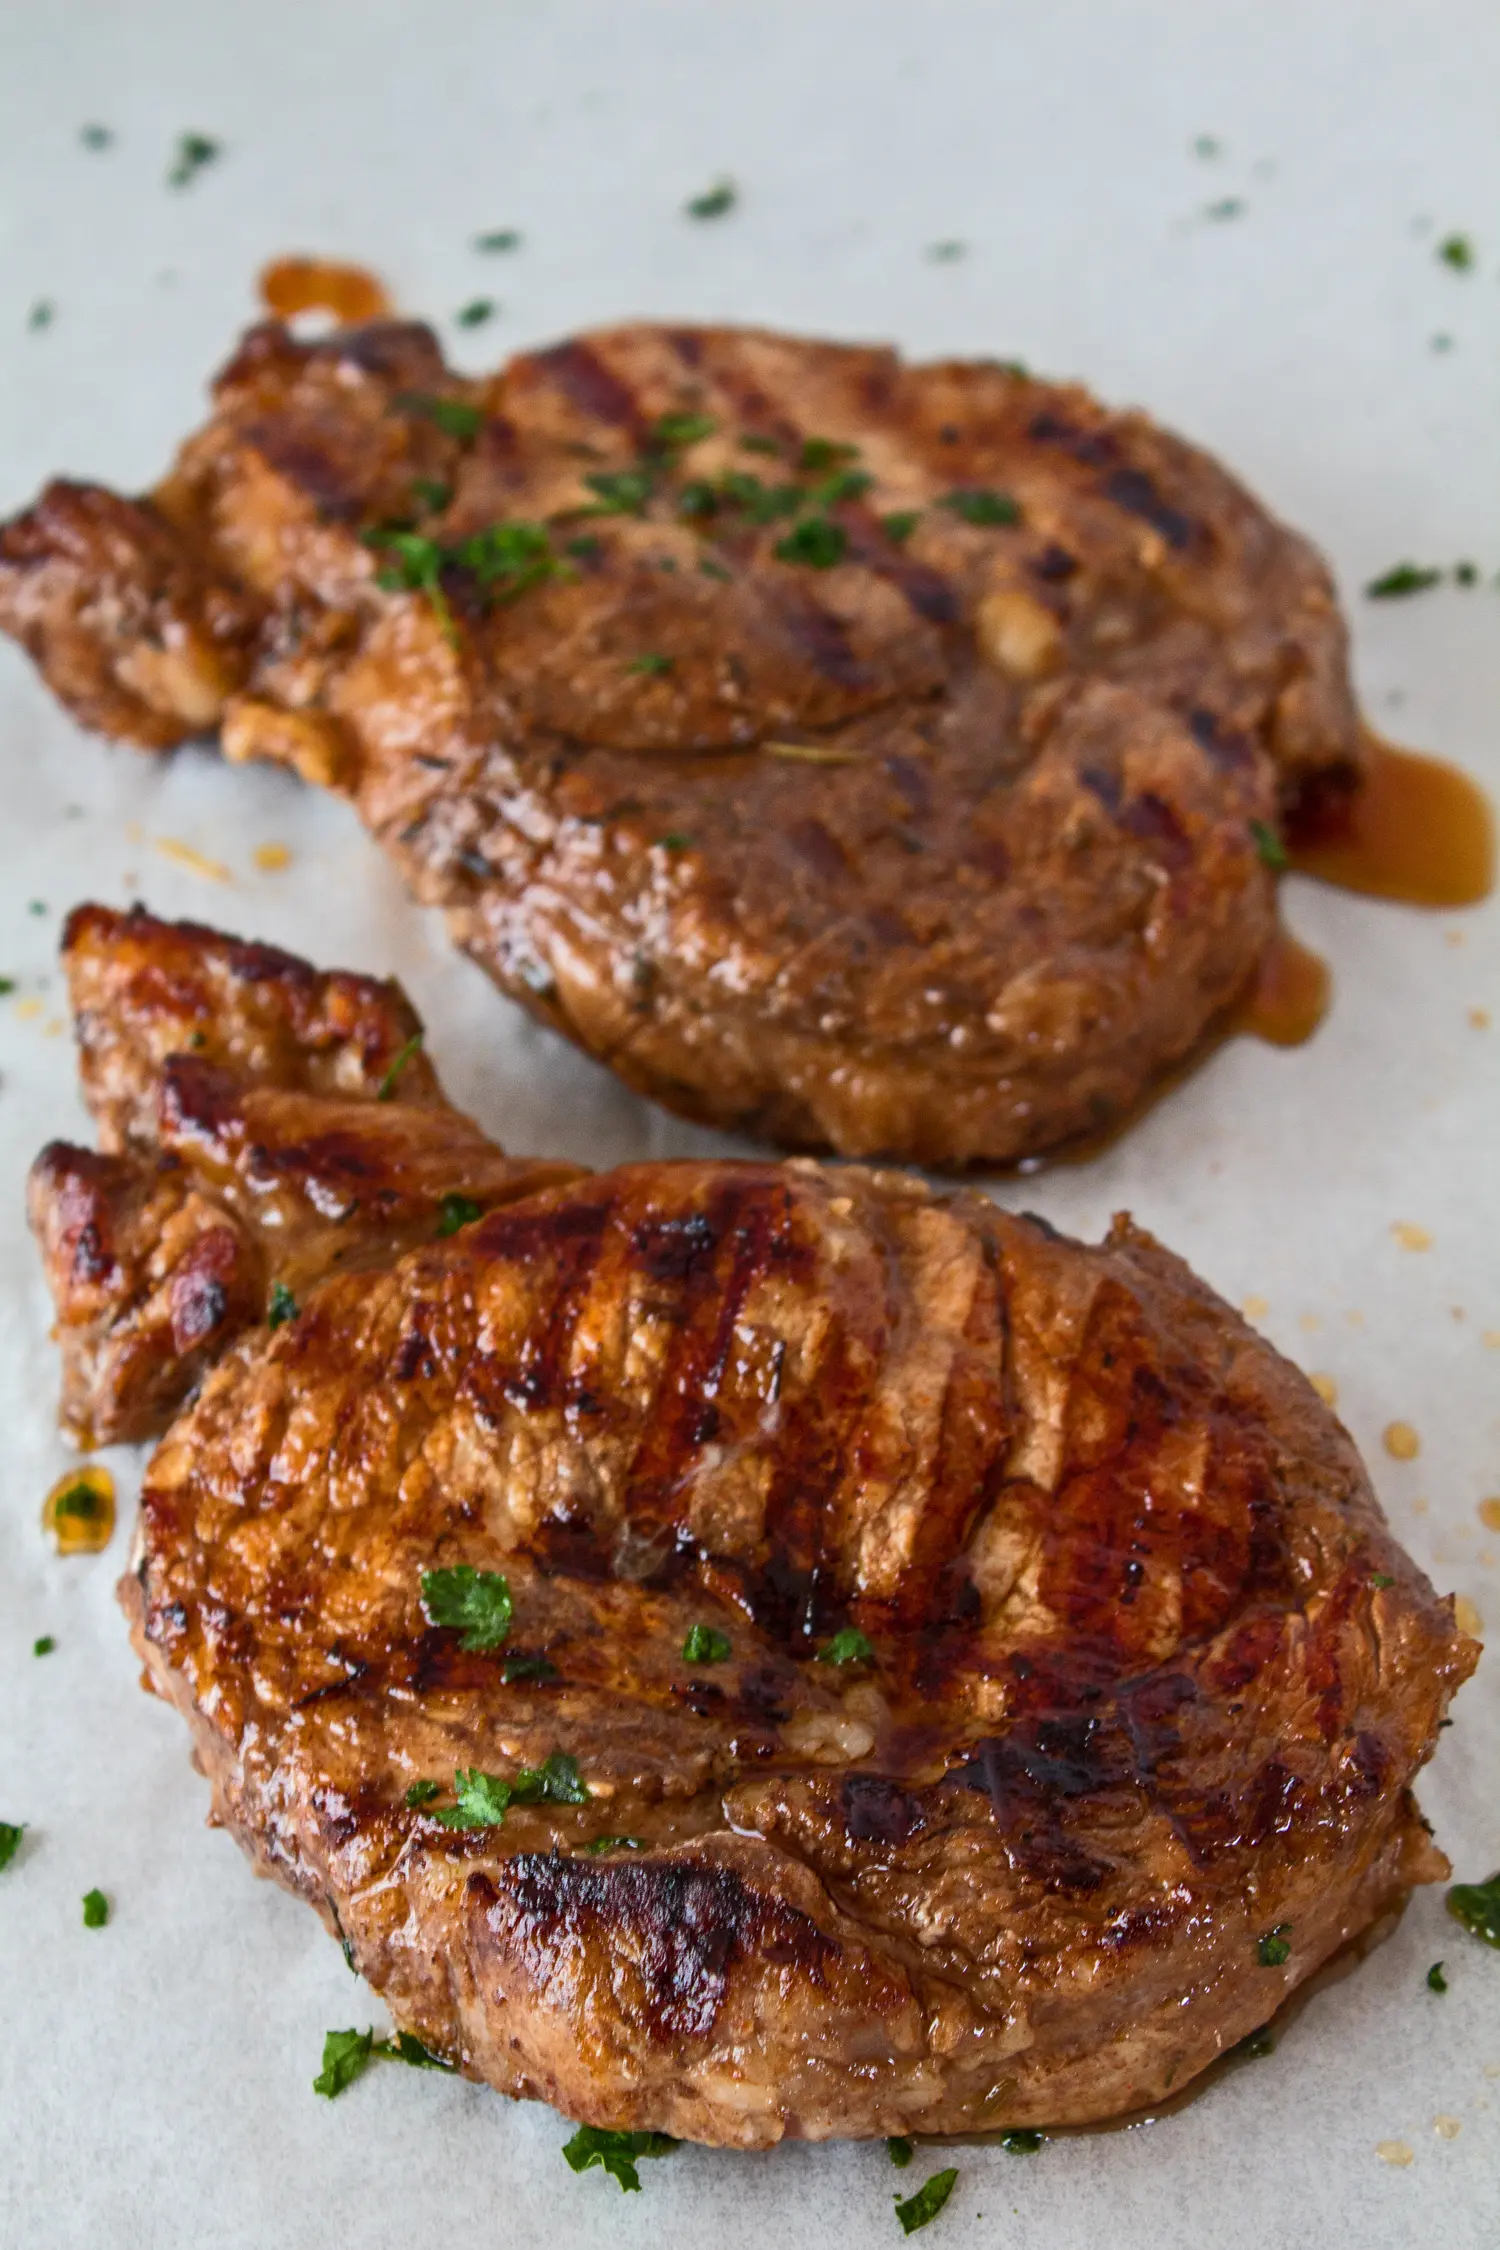 two marinated grilled pork chops shown on parchment paper while resting